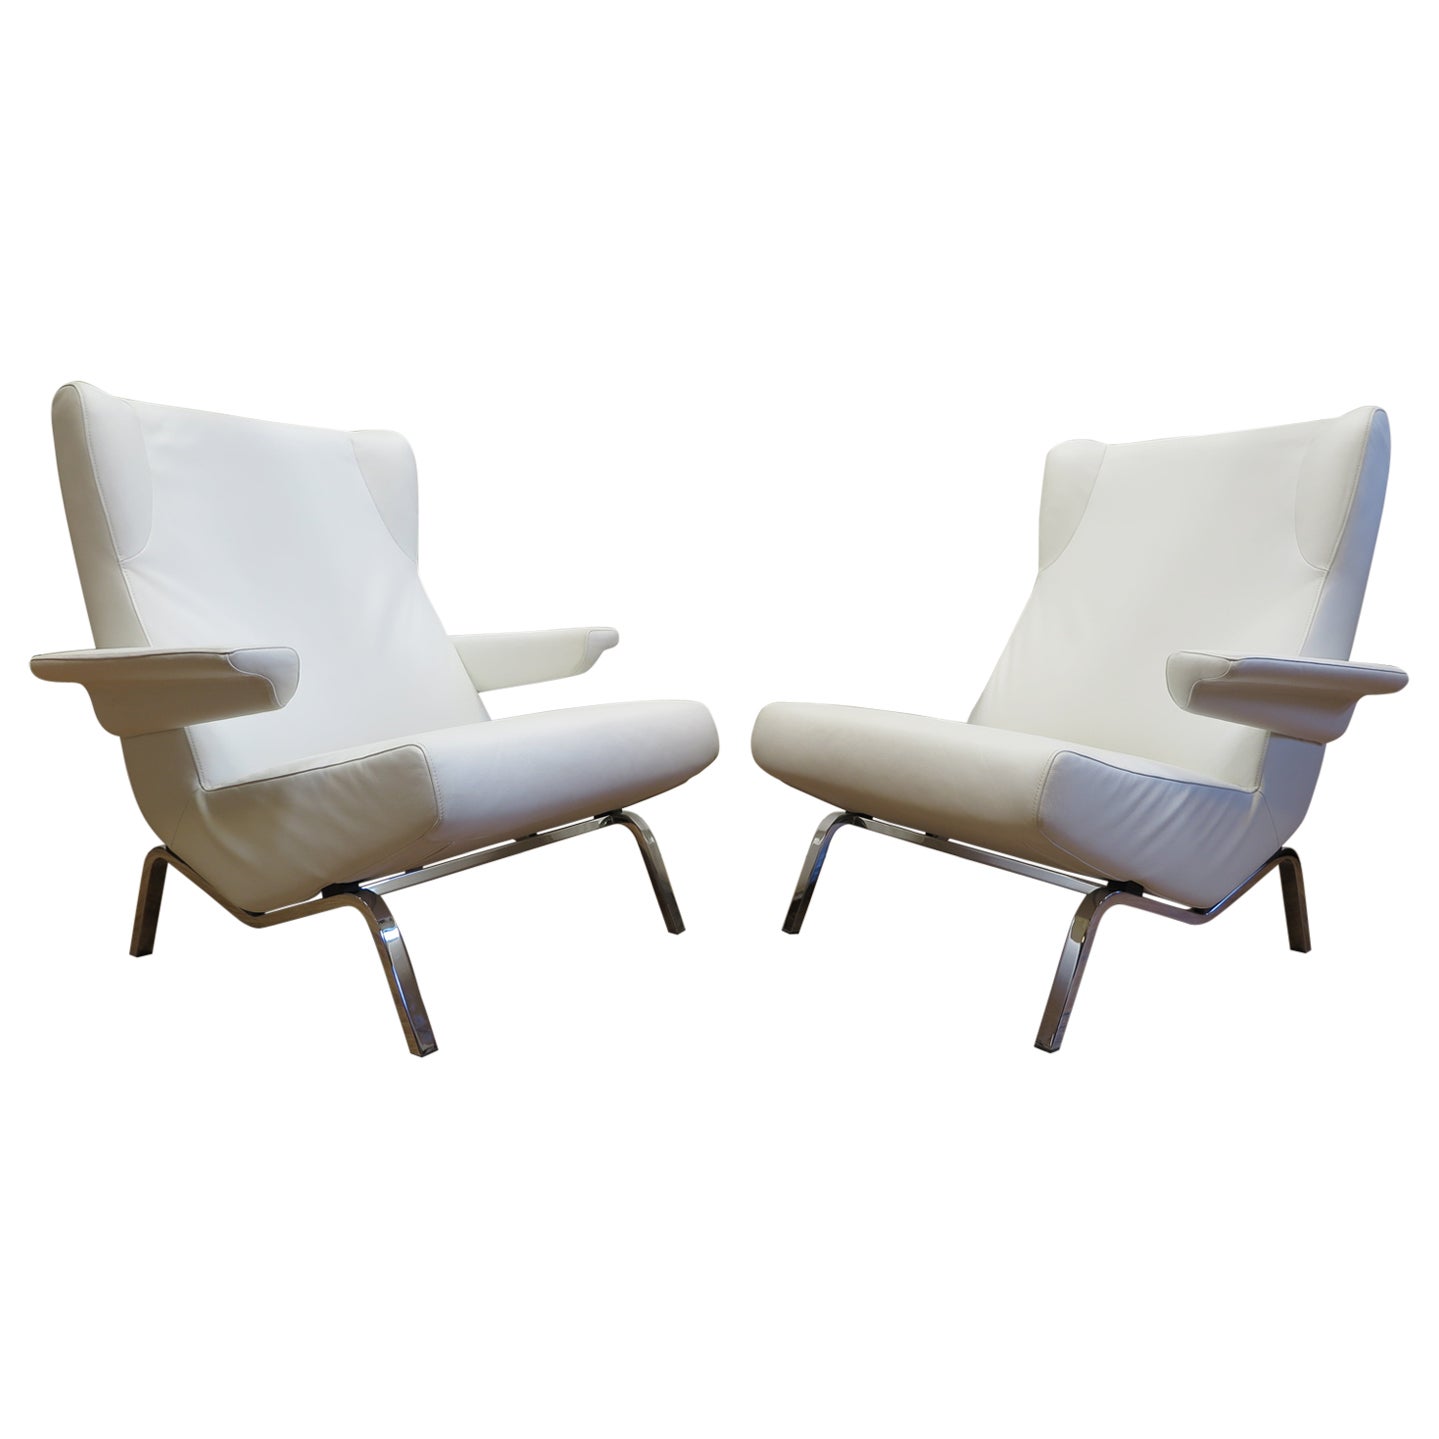 Pierre Paulin Archi chairs for Linge Roset. Very comfortable lounge style chairs perfect for spending time with a good book or movie. They have a large seating area with room to move around. Arm rests add an ideal place to lean on or rest your arms.